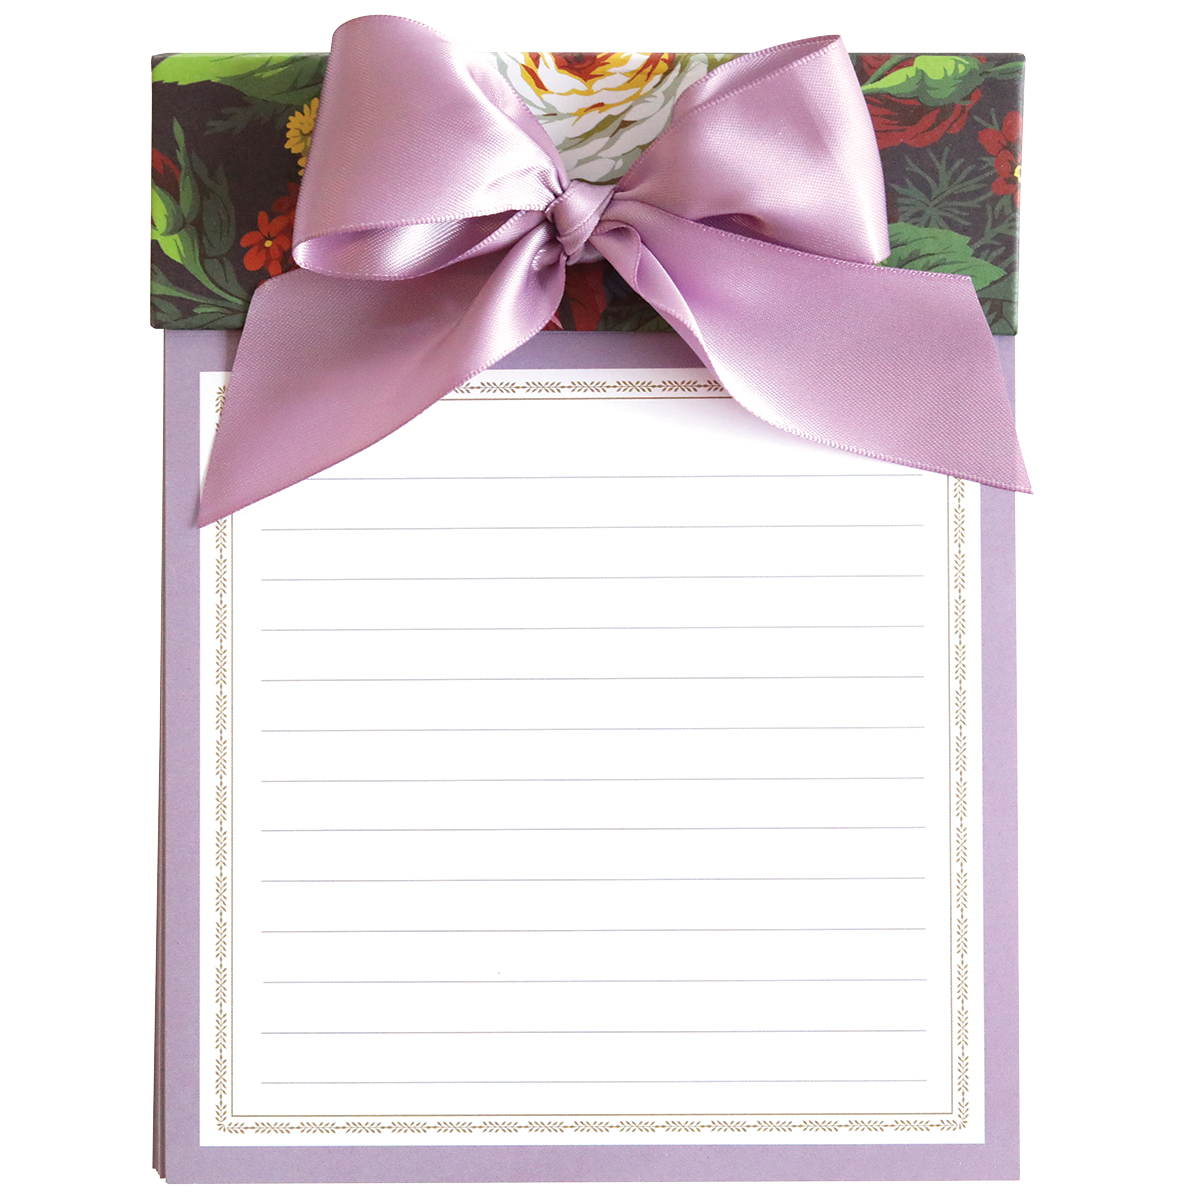 An elegant Astrid Floral Bow Pad gift box with a purple ribbon and a large notepad with lined and perforated sheets on top.